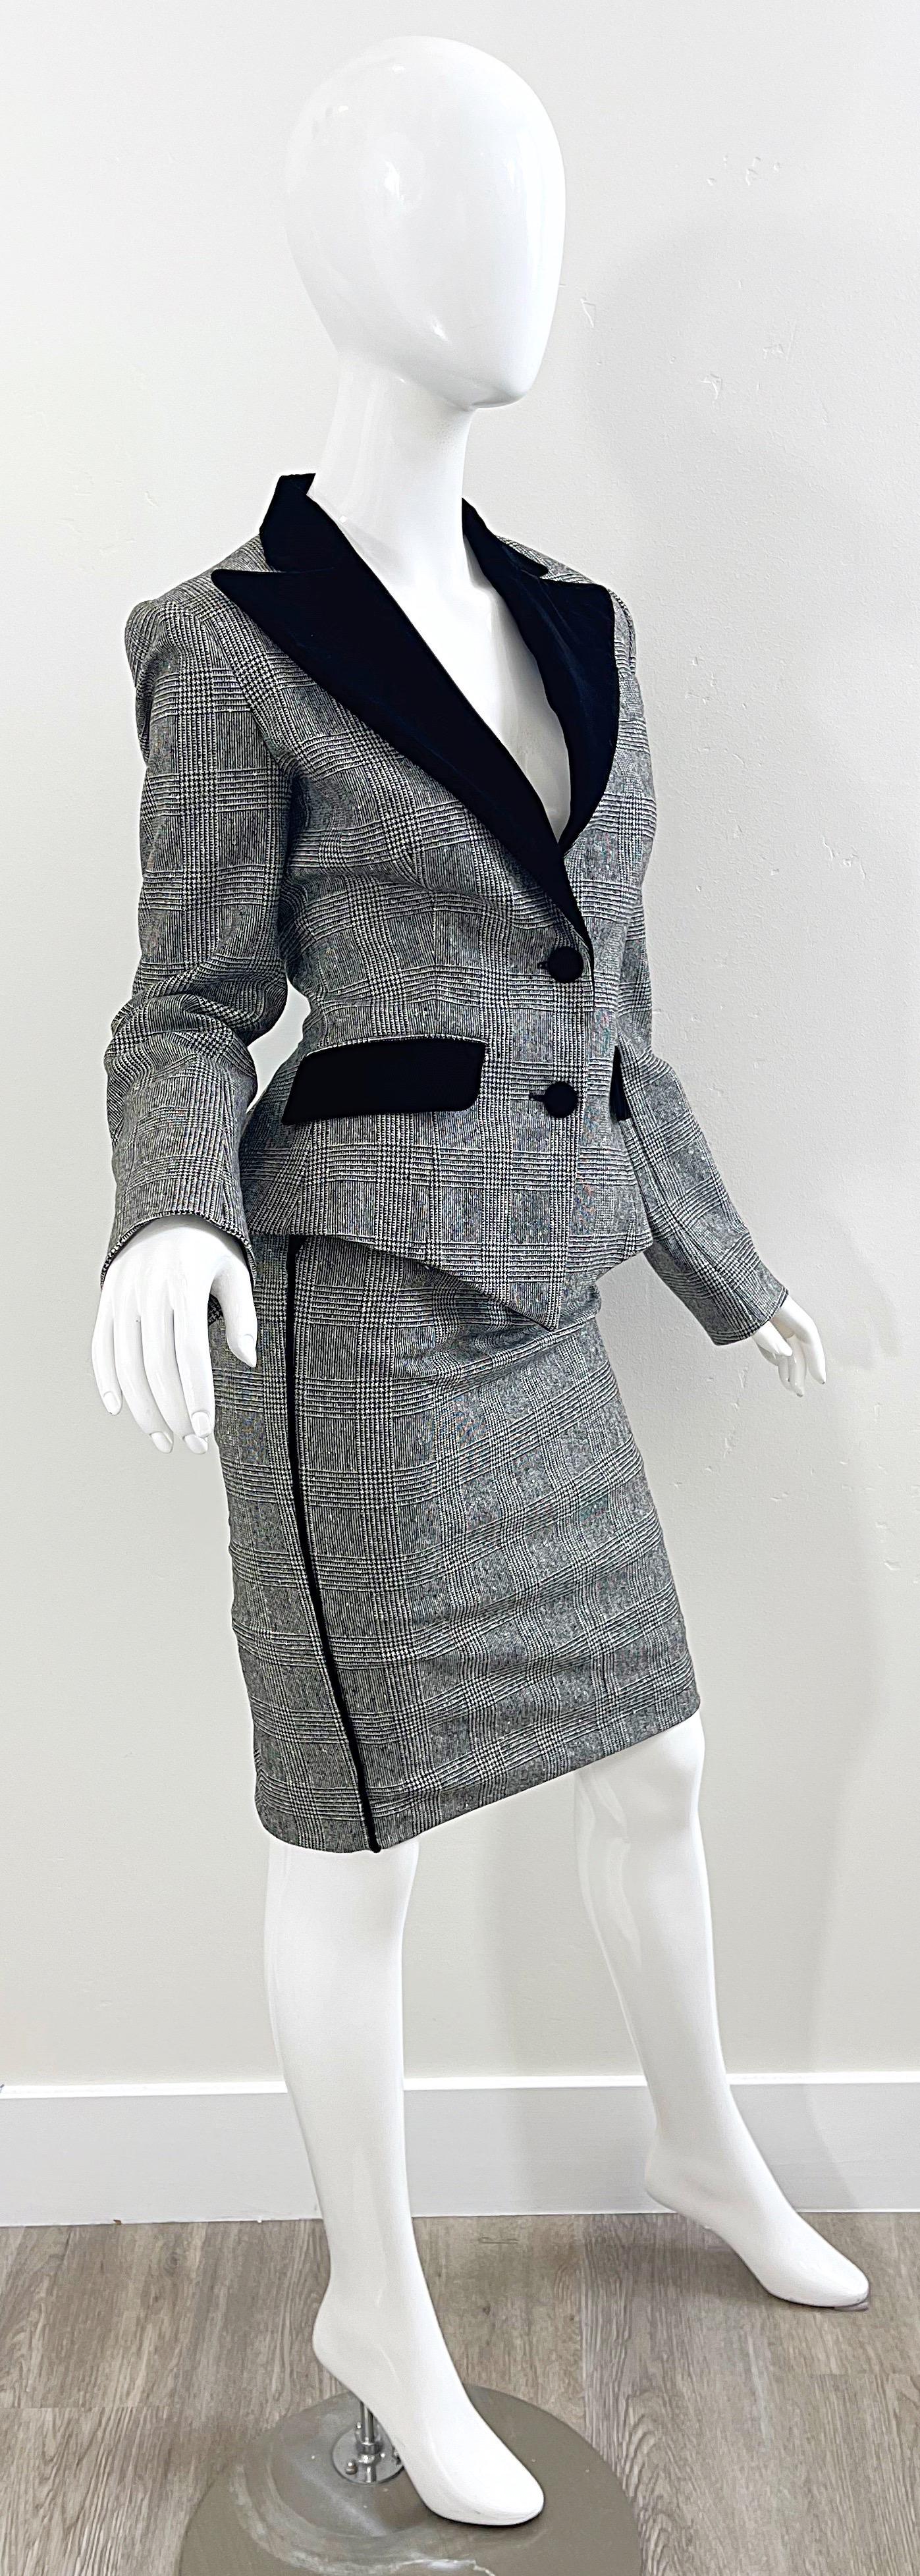 New Roberto Cavalli 2000s Size 42 / 8 Black and White Plaid Skirt Suit Y2K For Sale 6